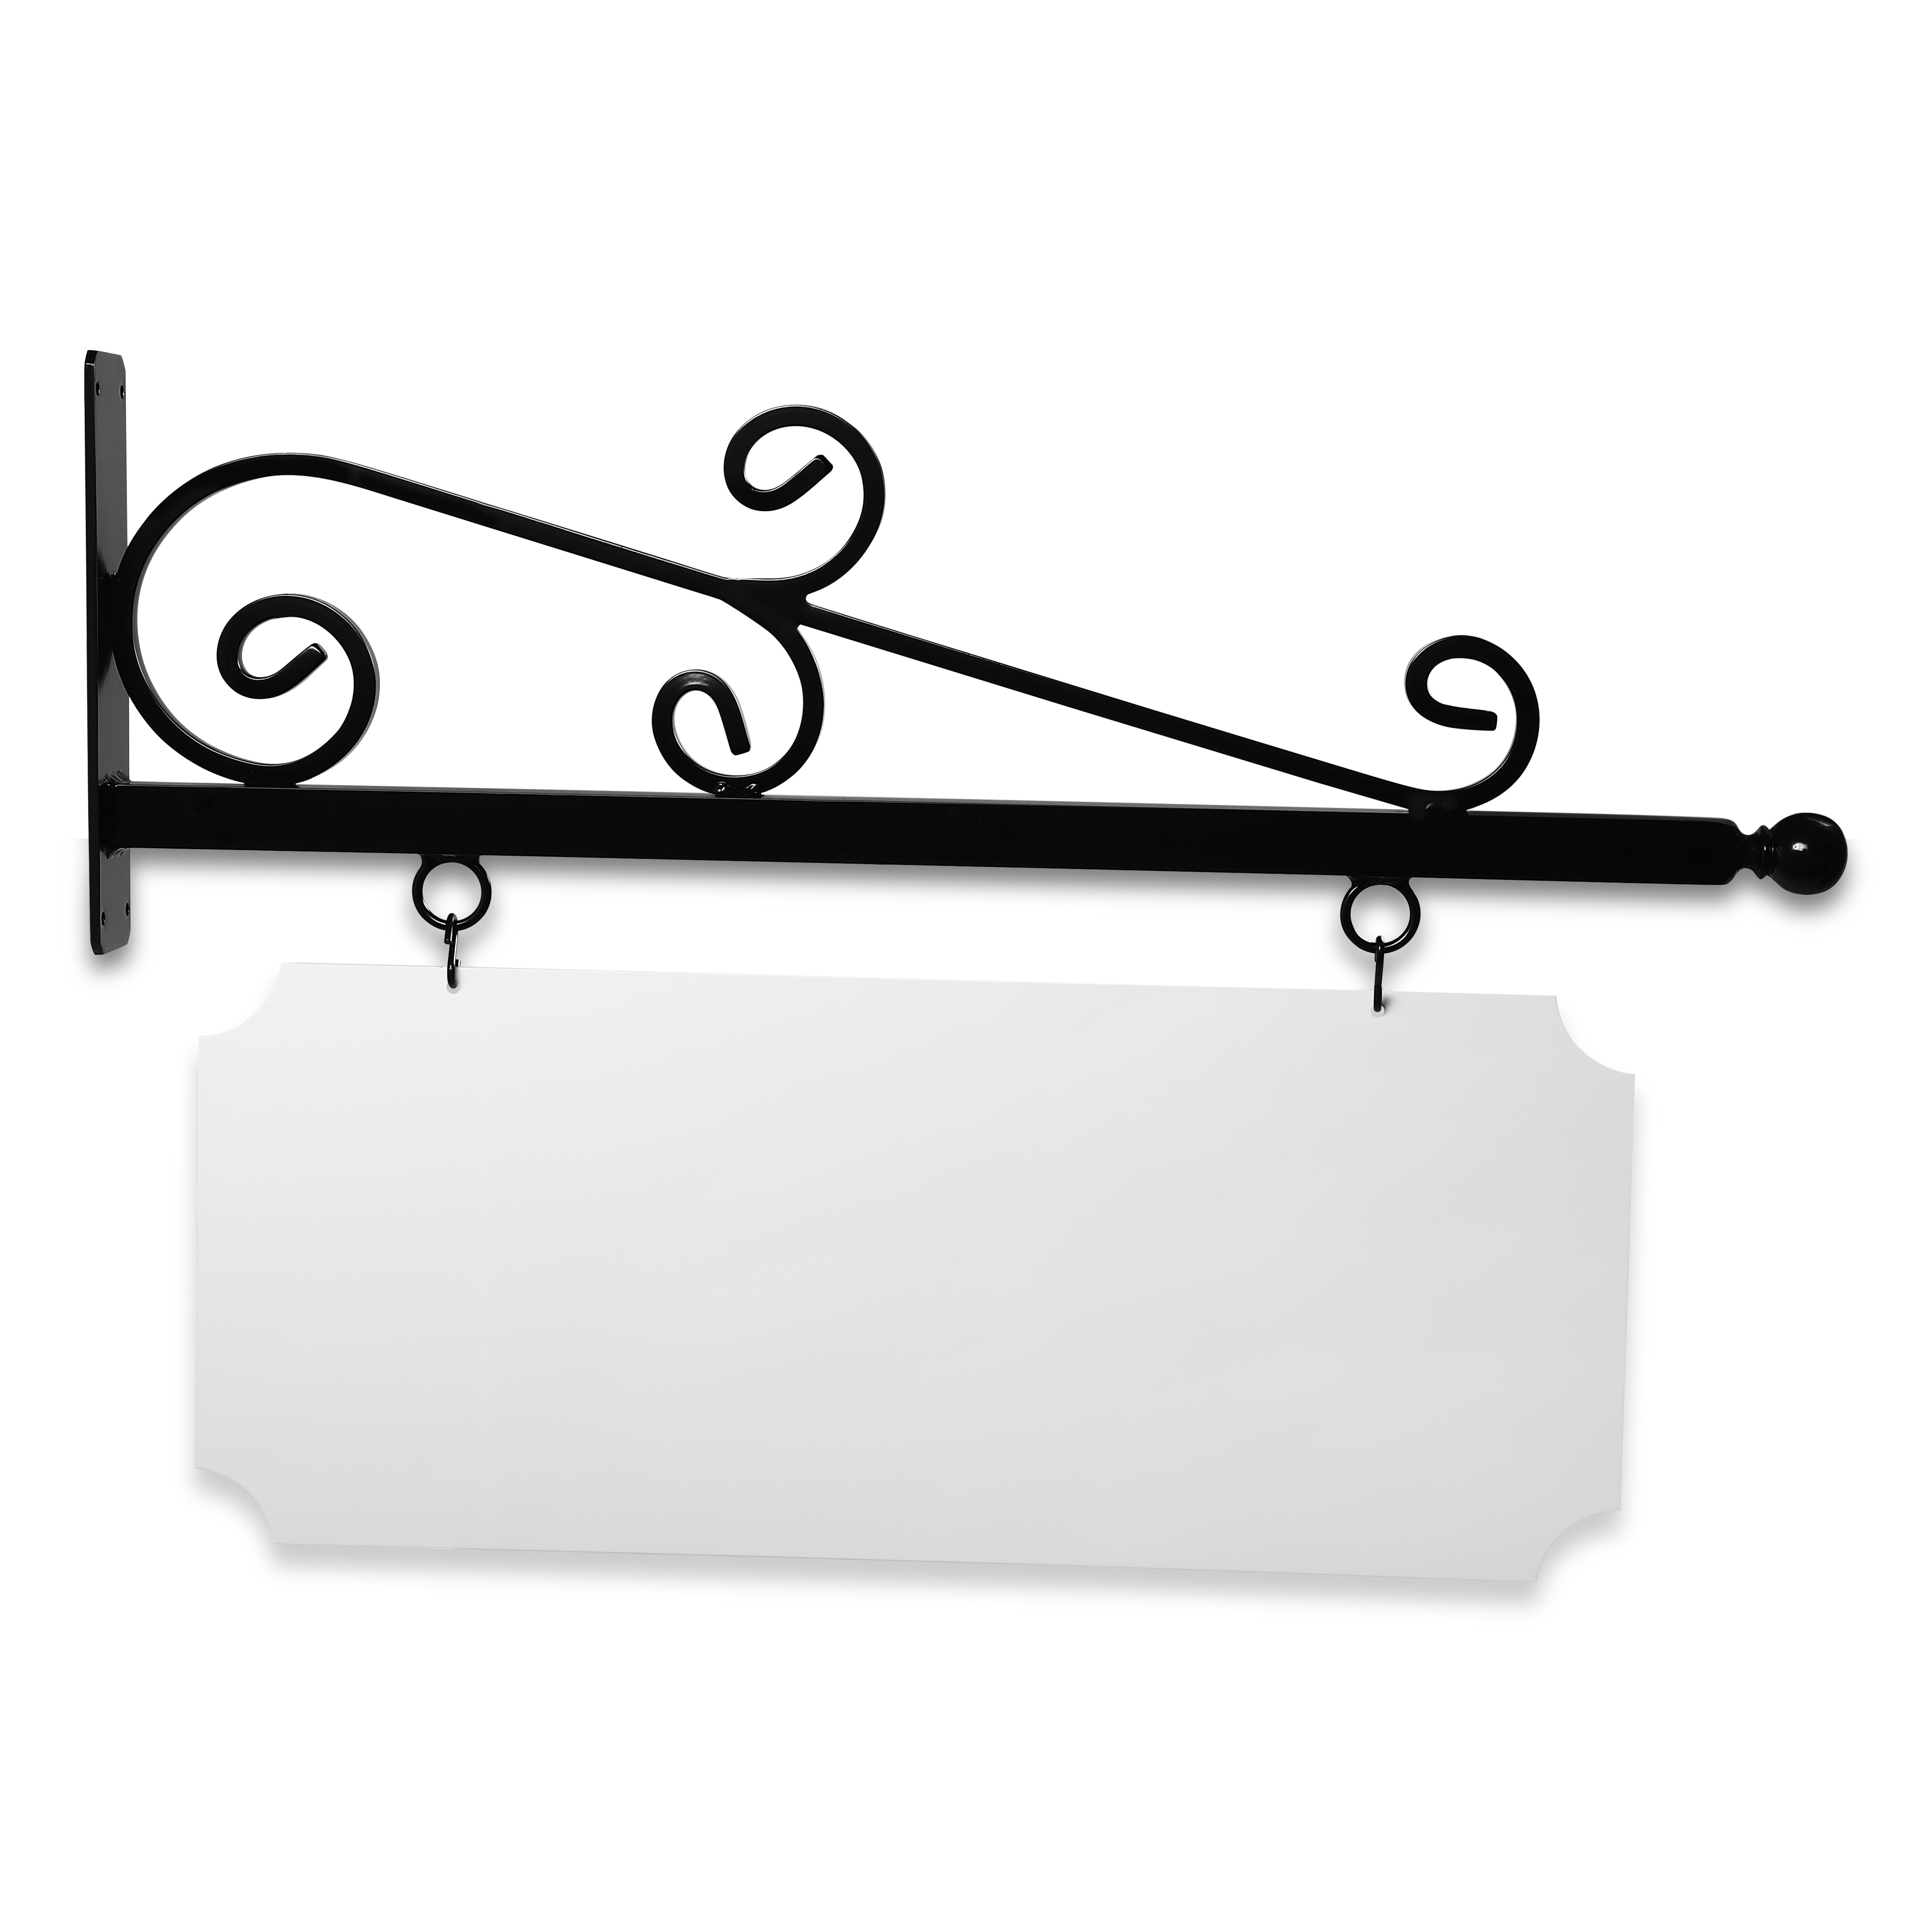 36'' Wide Wispy Style Bracket in  Black Powder Coated Aluminum with 14'' Tall X 34'' Wide X .080'' Thick White Aluminum Sign Blank and 2 Black Powder Coated S-Hooks